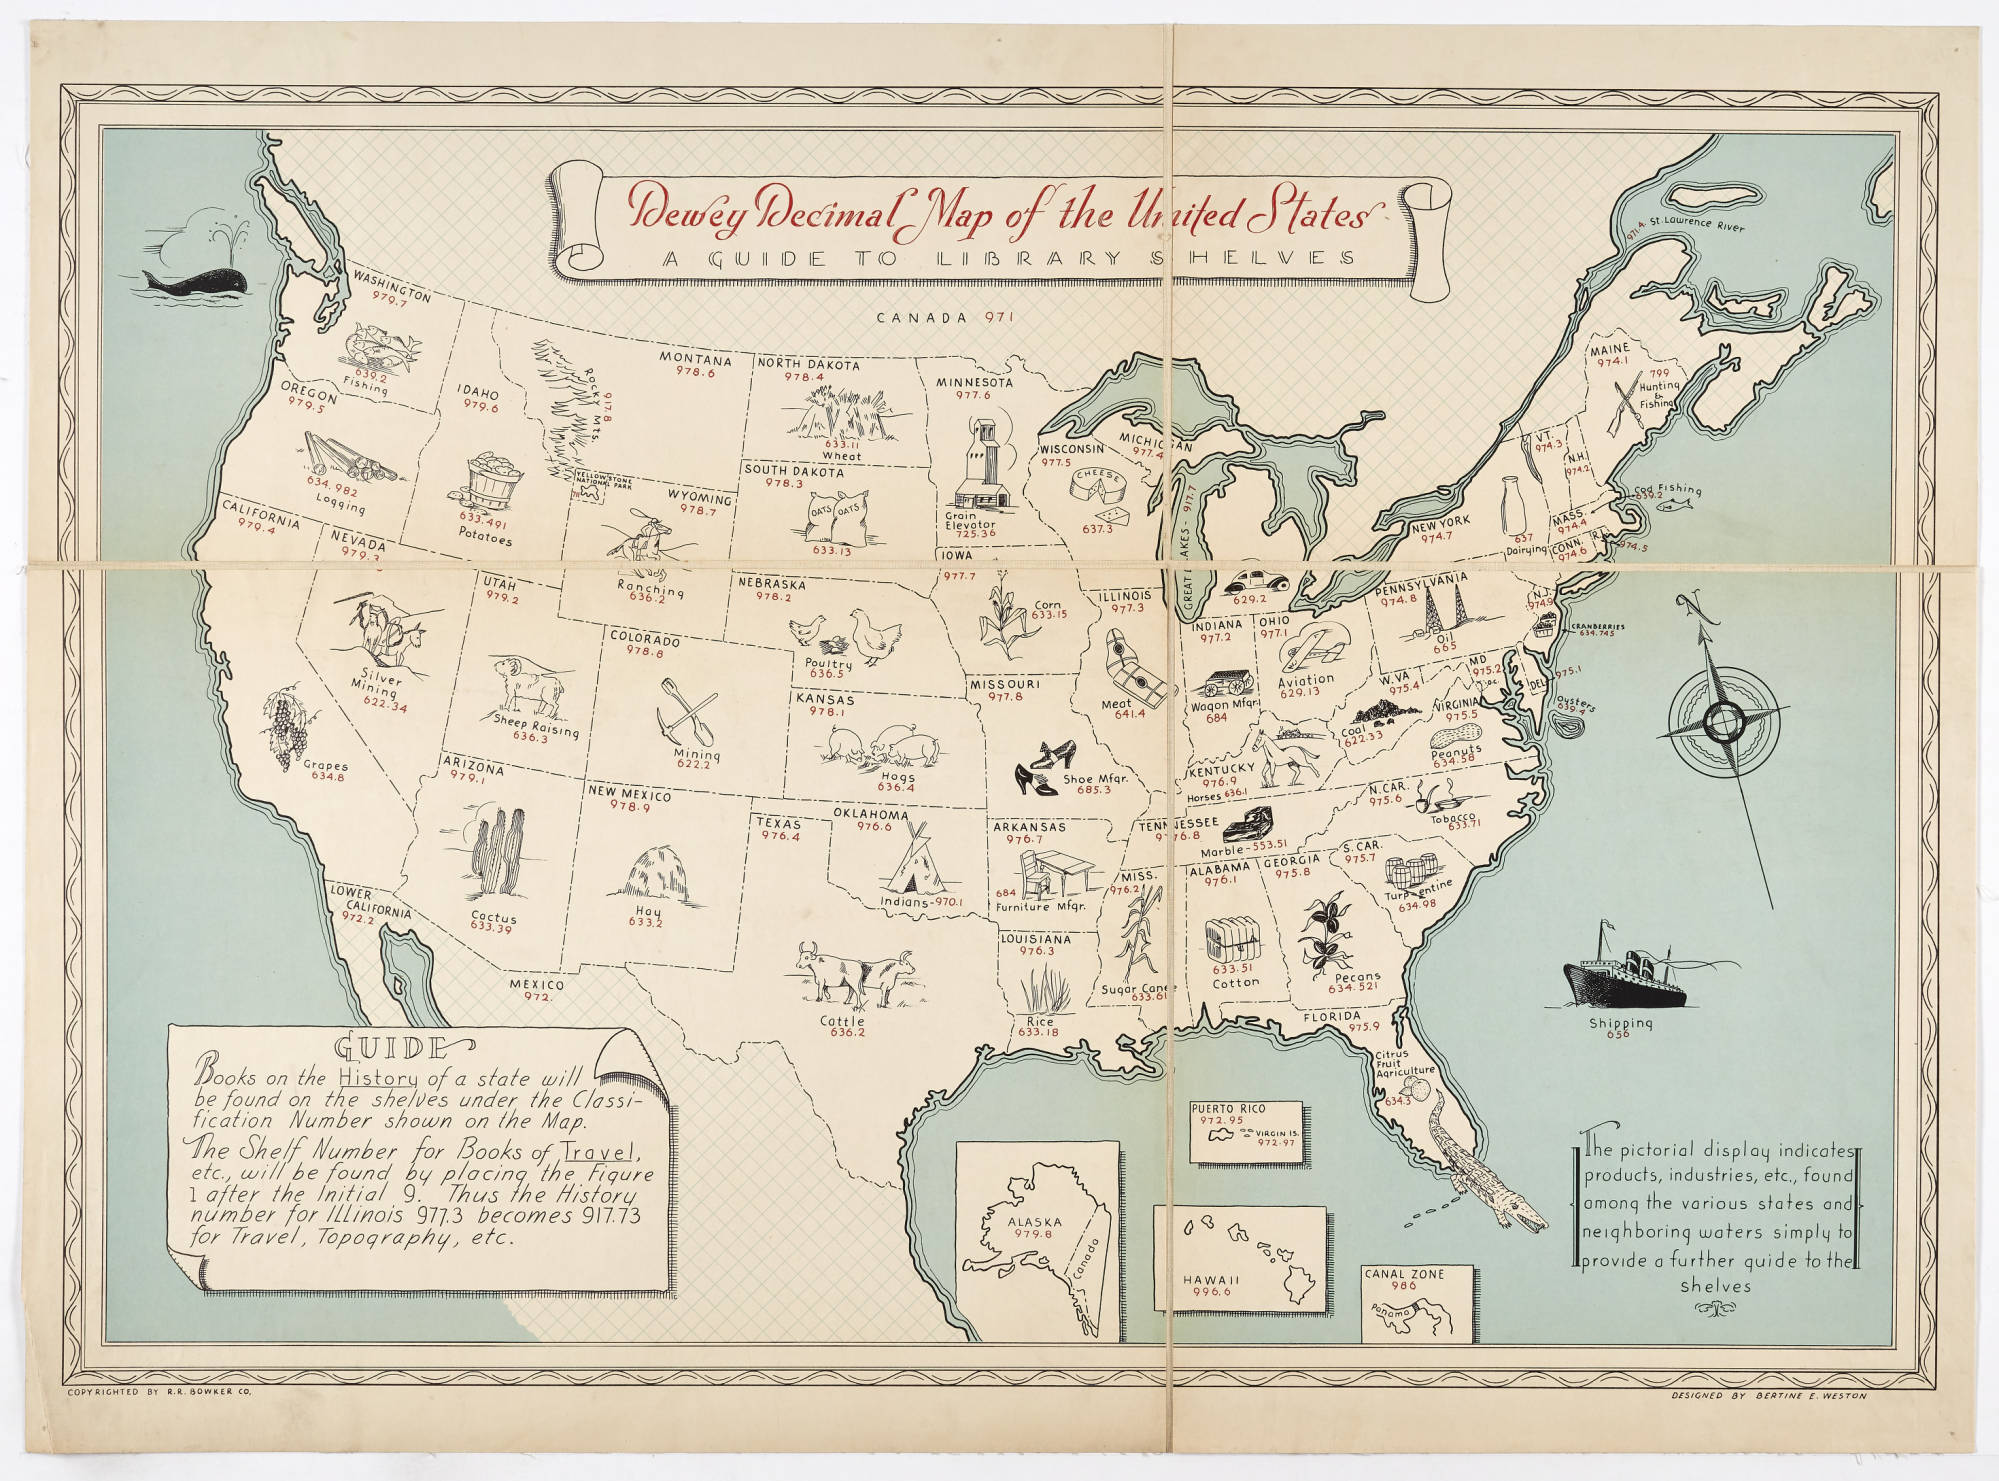 Vintage illustrated map of the united states with dewey decimal numbers and corresponding library subjects superimposed on each state.